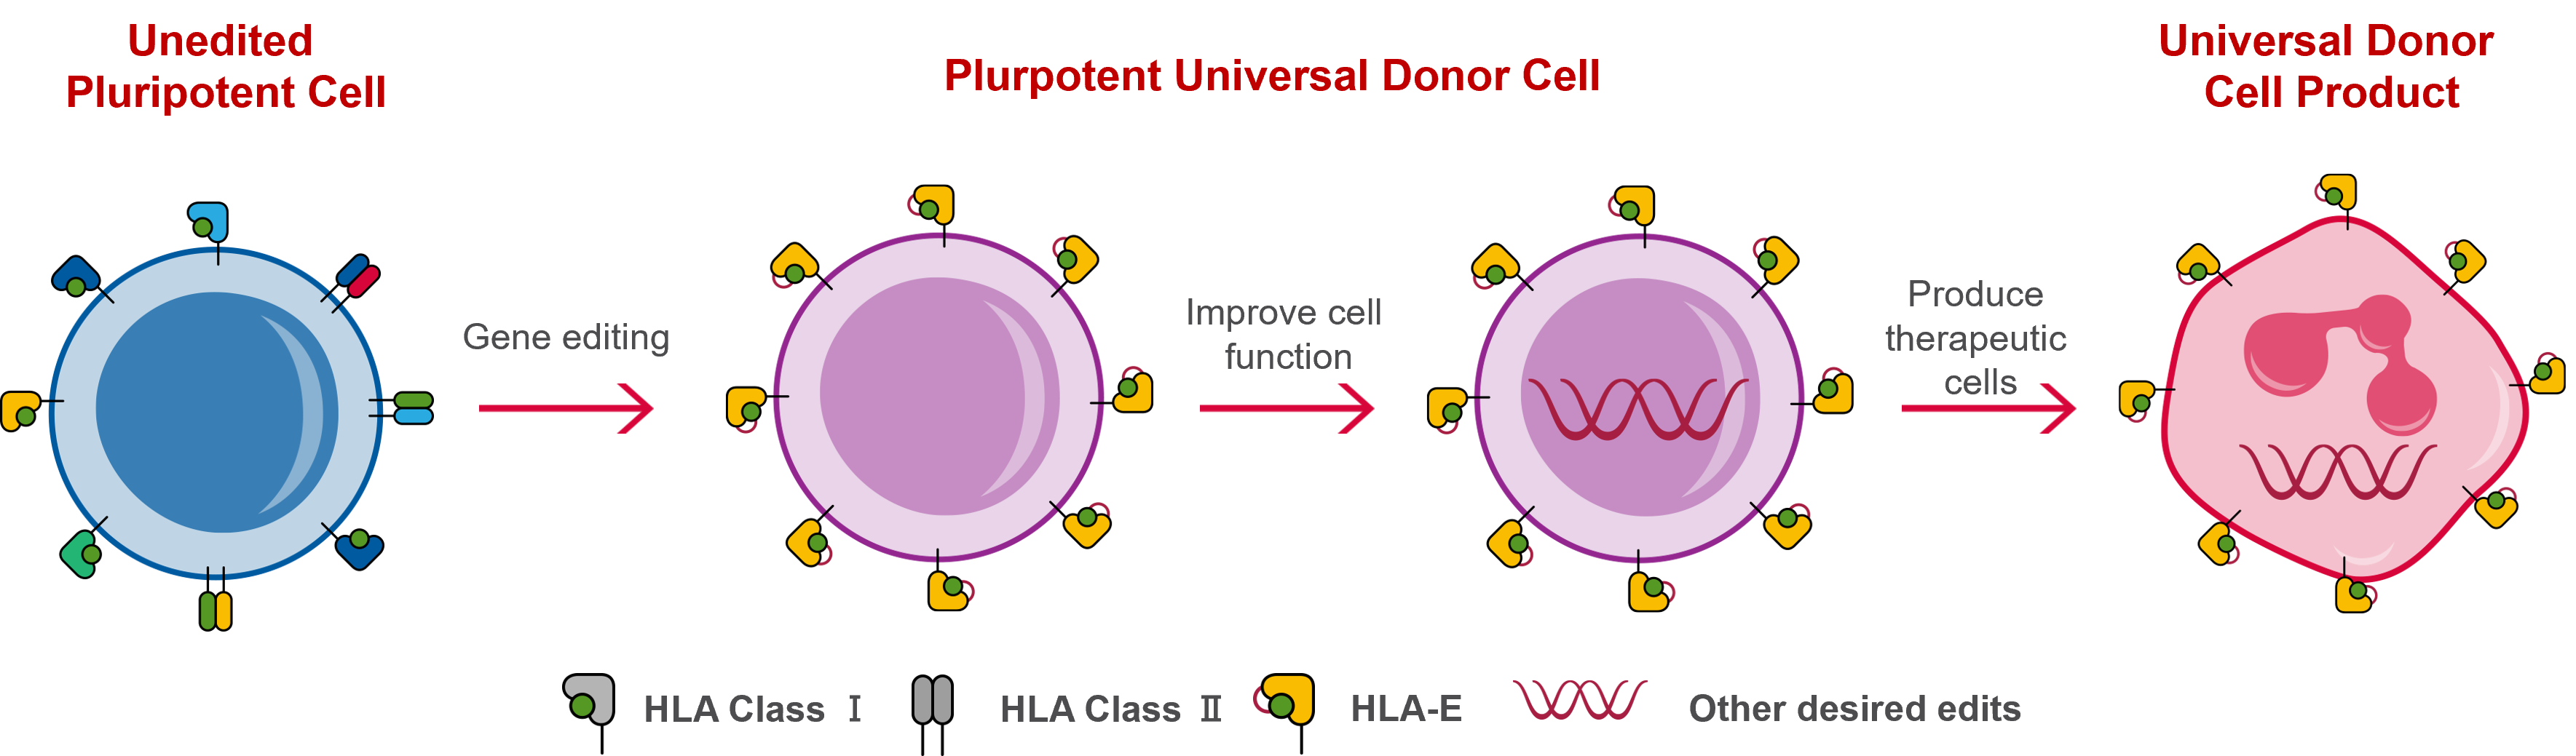 universal_donor_cell_technology